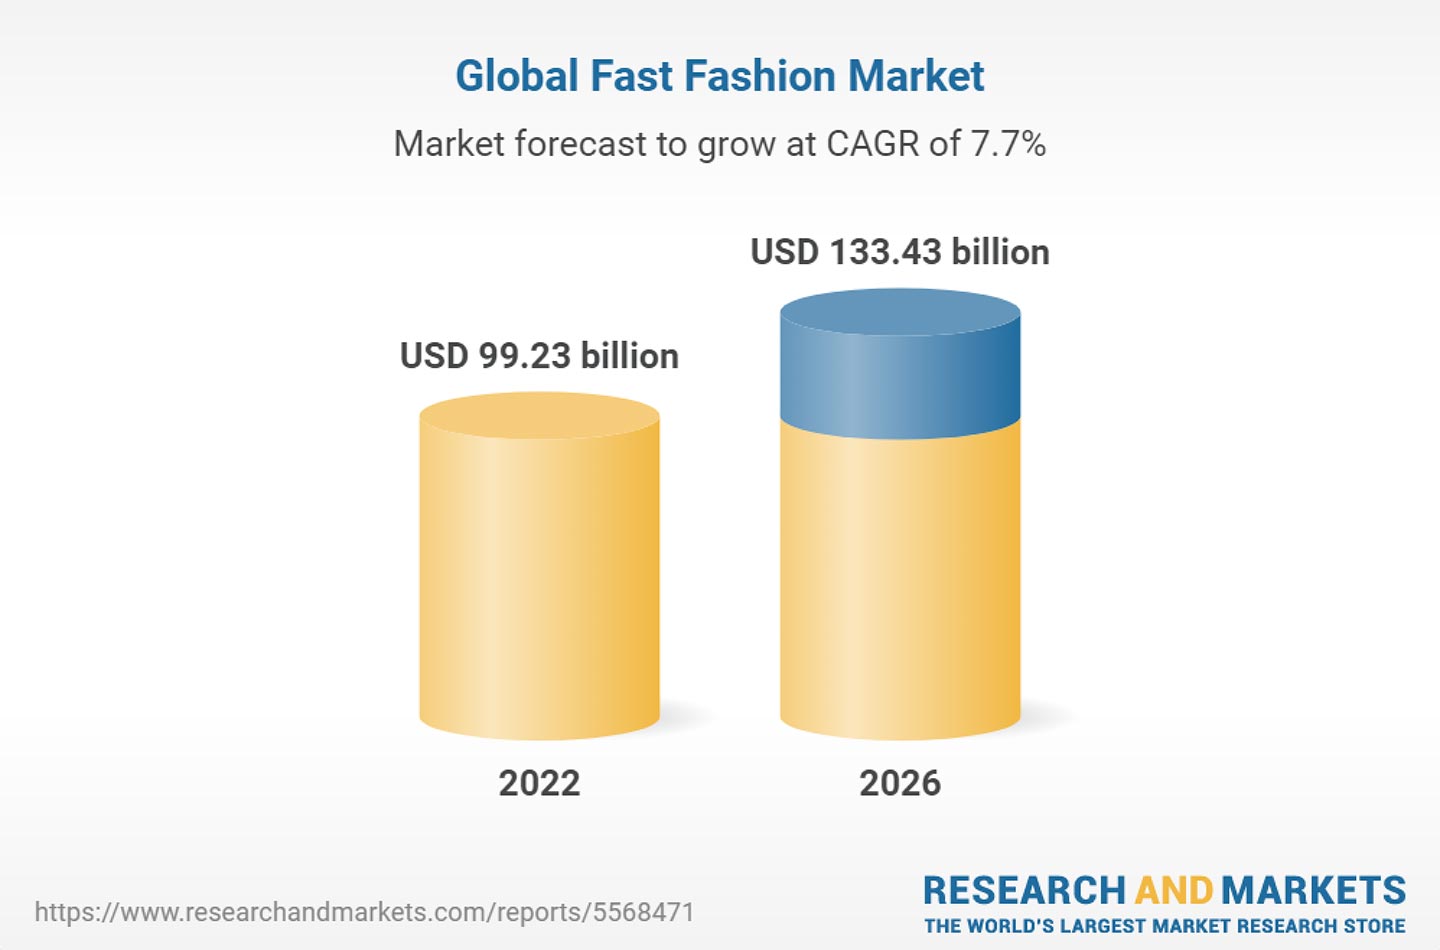 Source: Research and Markets, Fast Fashion Global Market Report 2022